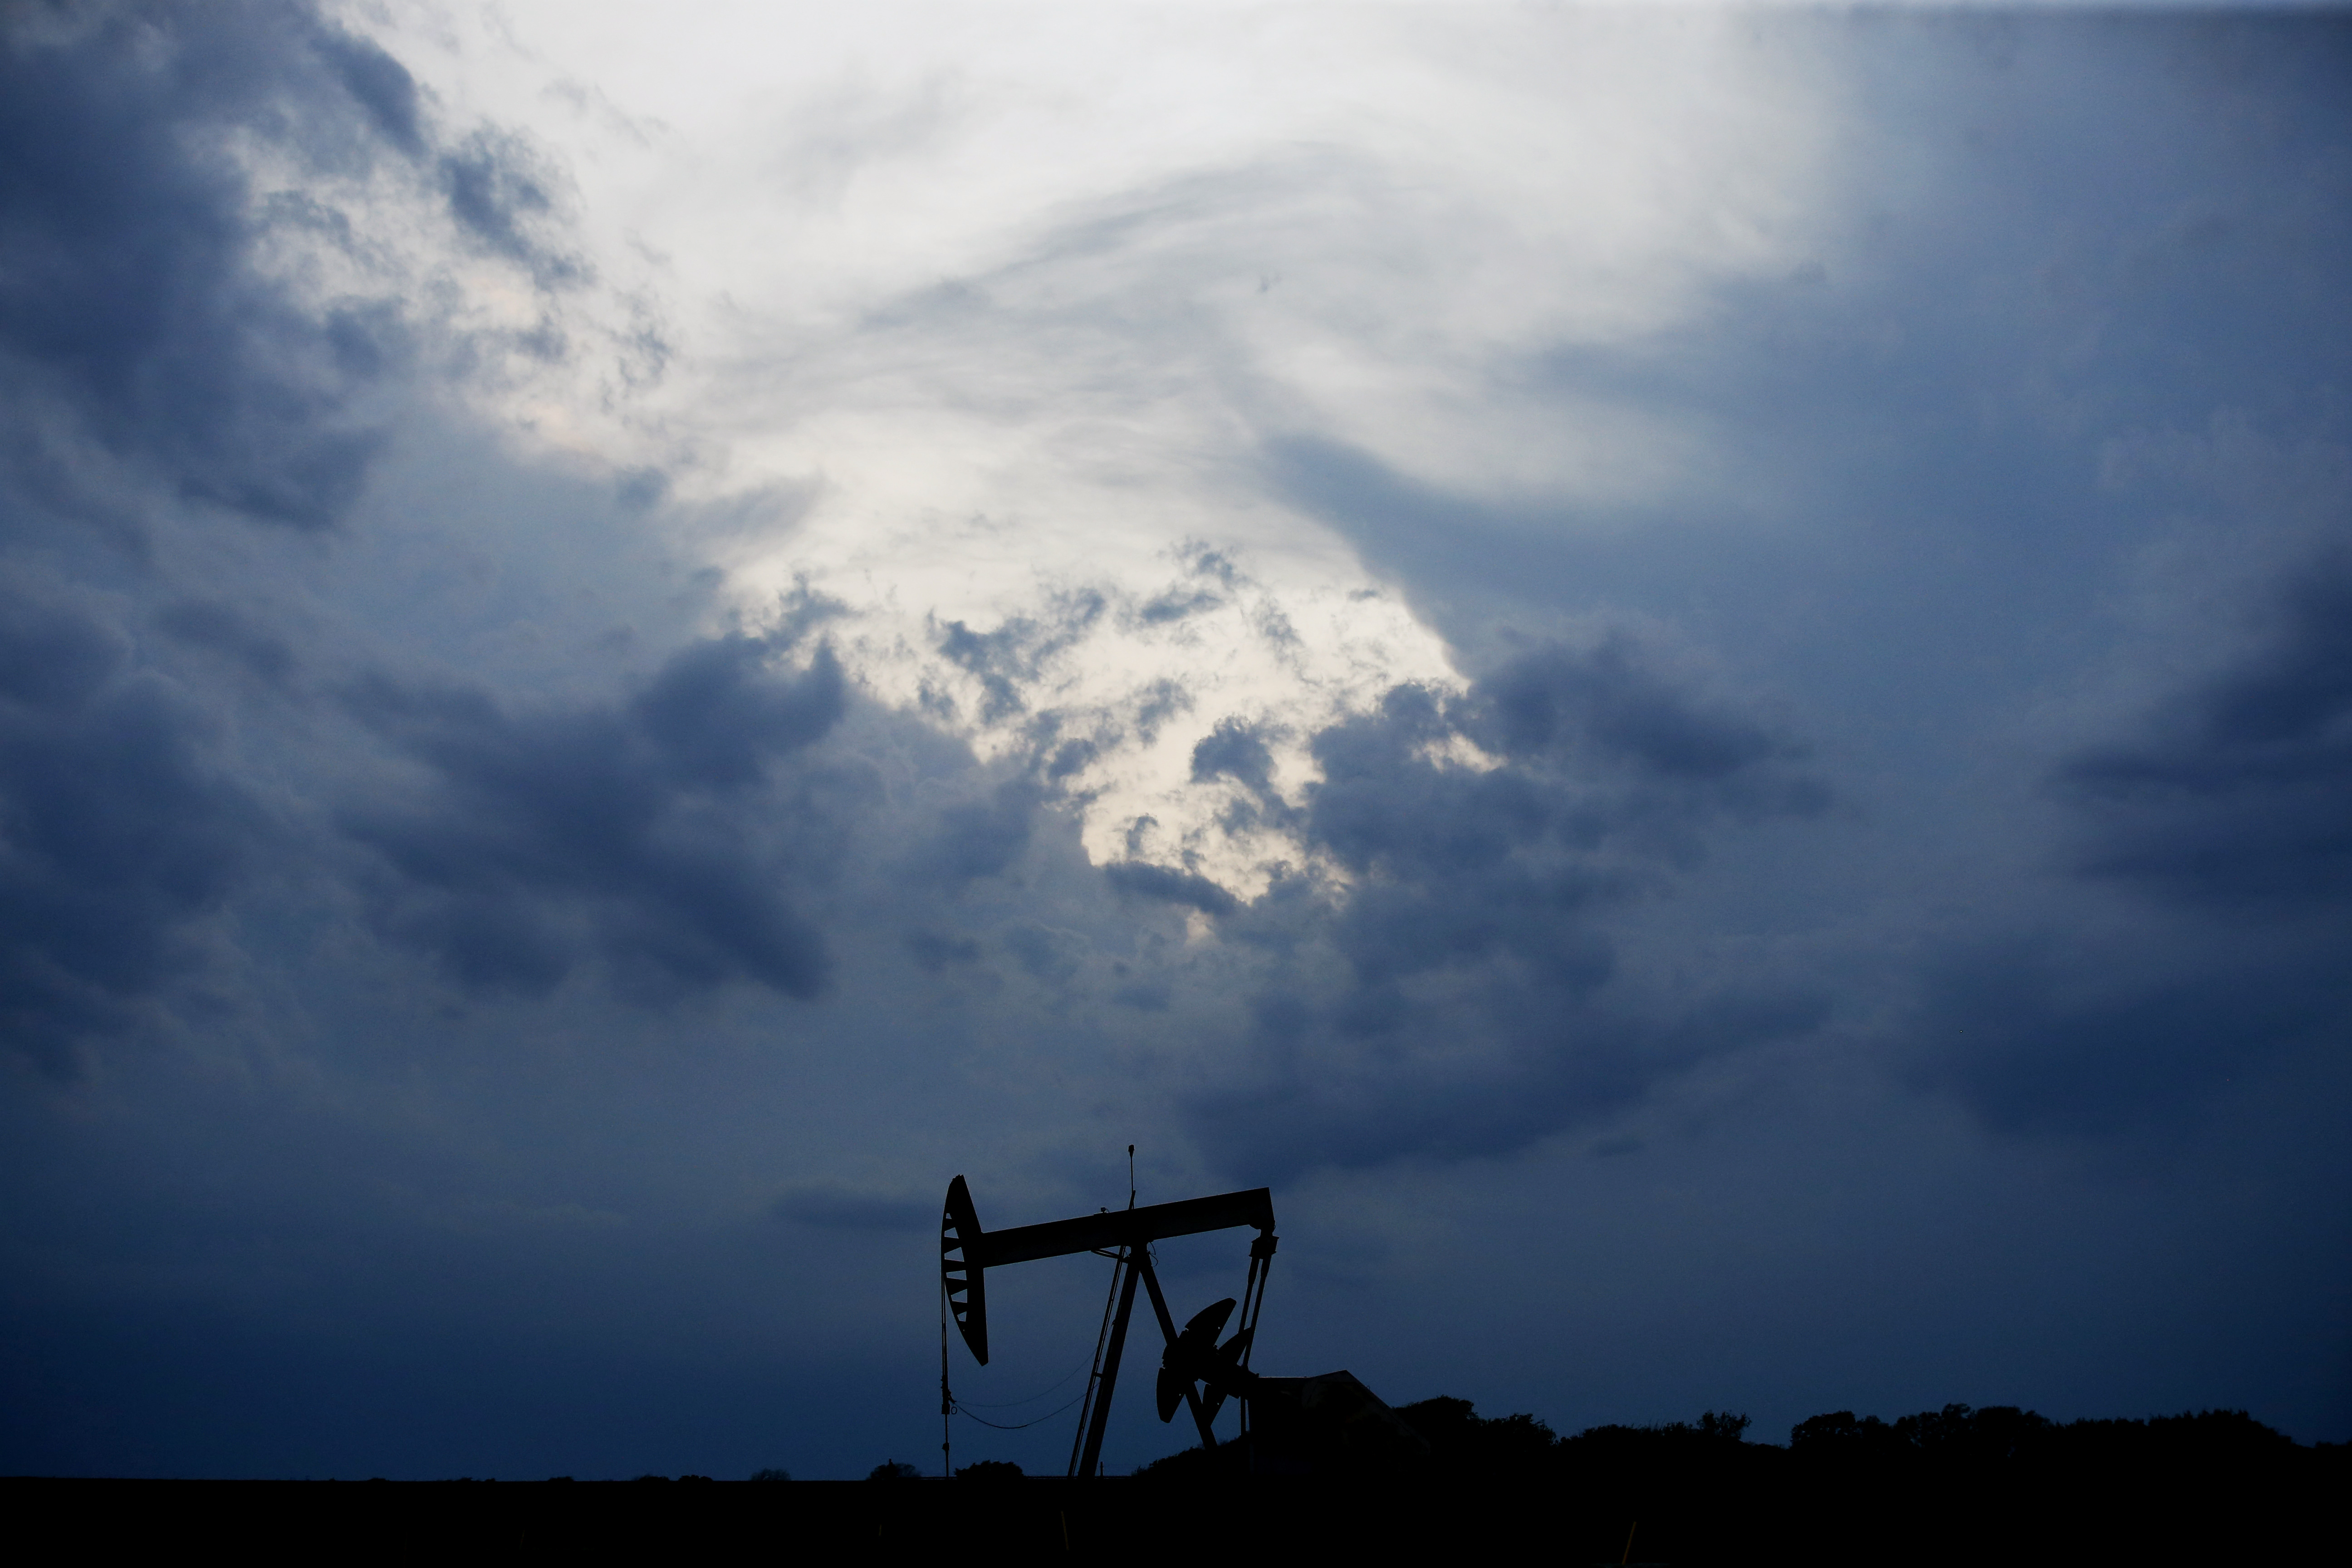 A pumpjack is pictured as a storm moves in Tuesday, April 21, 2020, in Oklahoma City. Oil prices continue to drop, because very few people are flying or driving, and factories have shut amid widespread stay-at-home orders due to the coronavirus cencerns. (AP Photo/Sue Ogrocki)